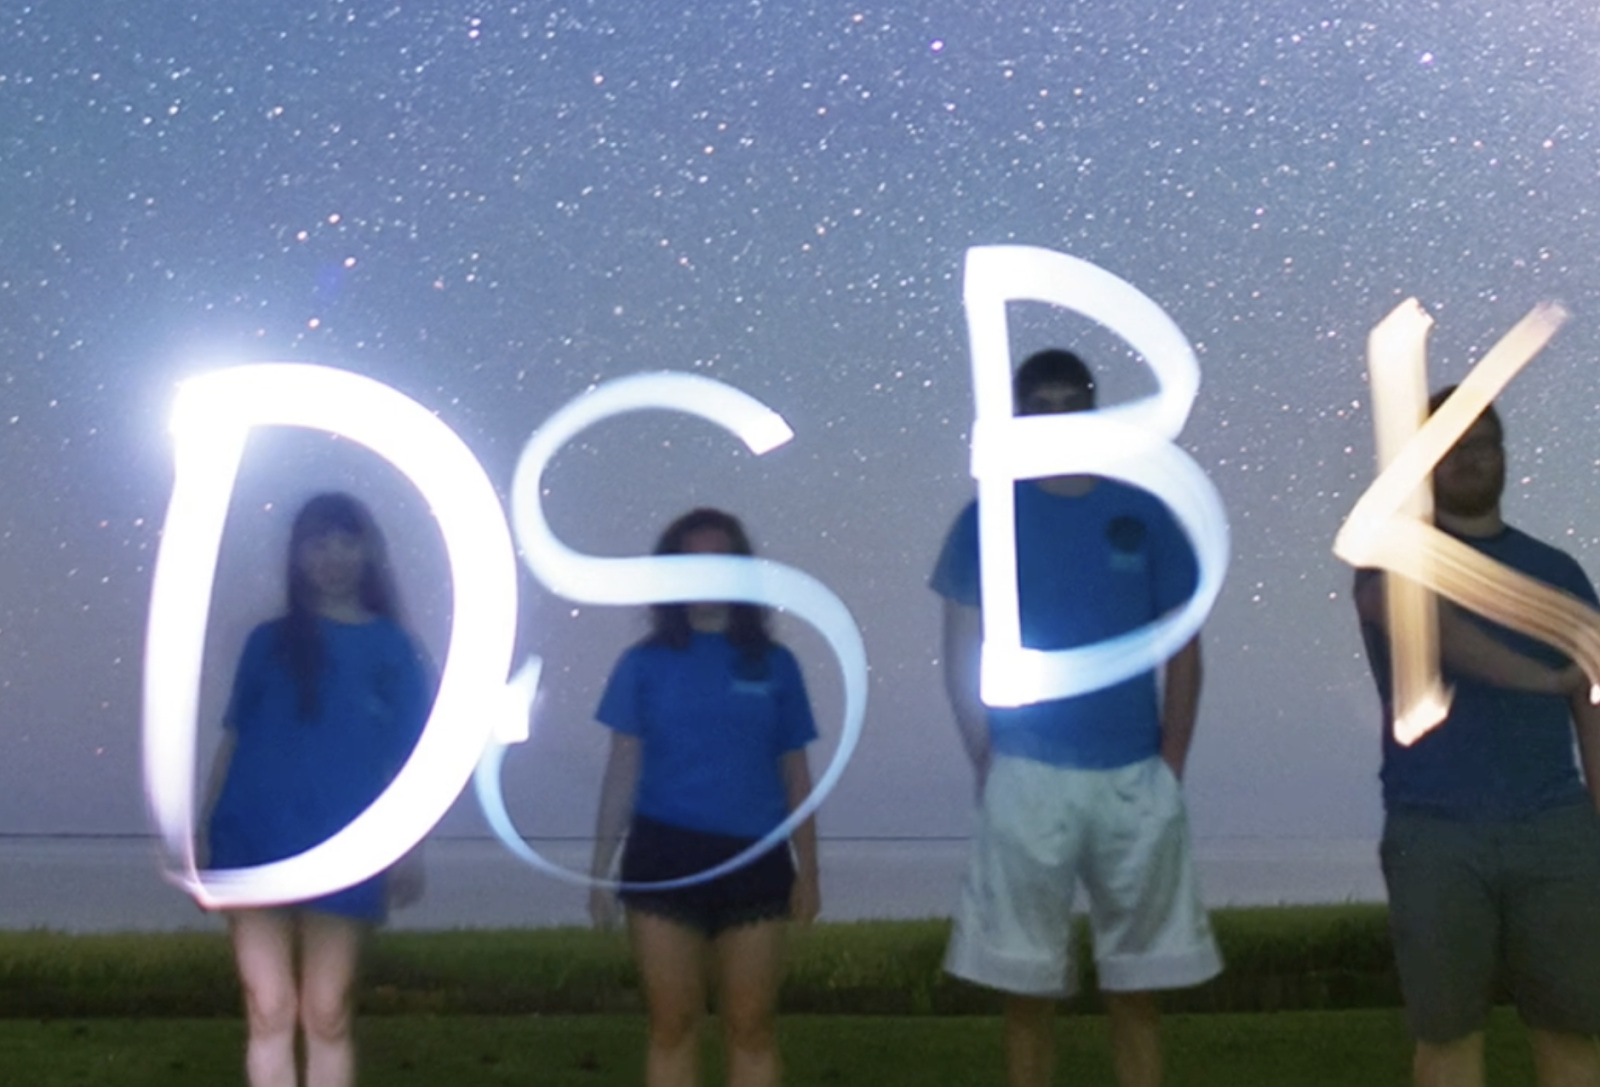 Four people stand outside at night with starry sky and letters "DSBK" written in light in a long exposure image